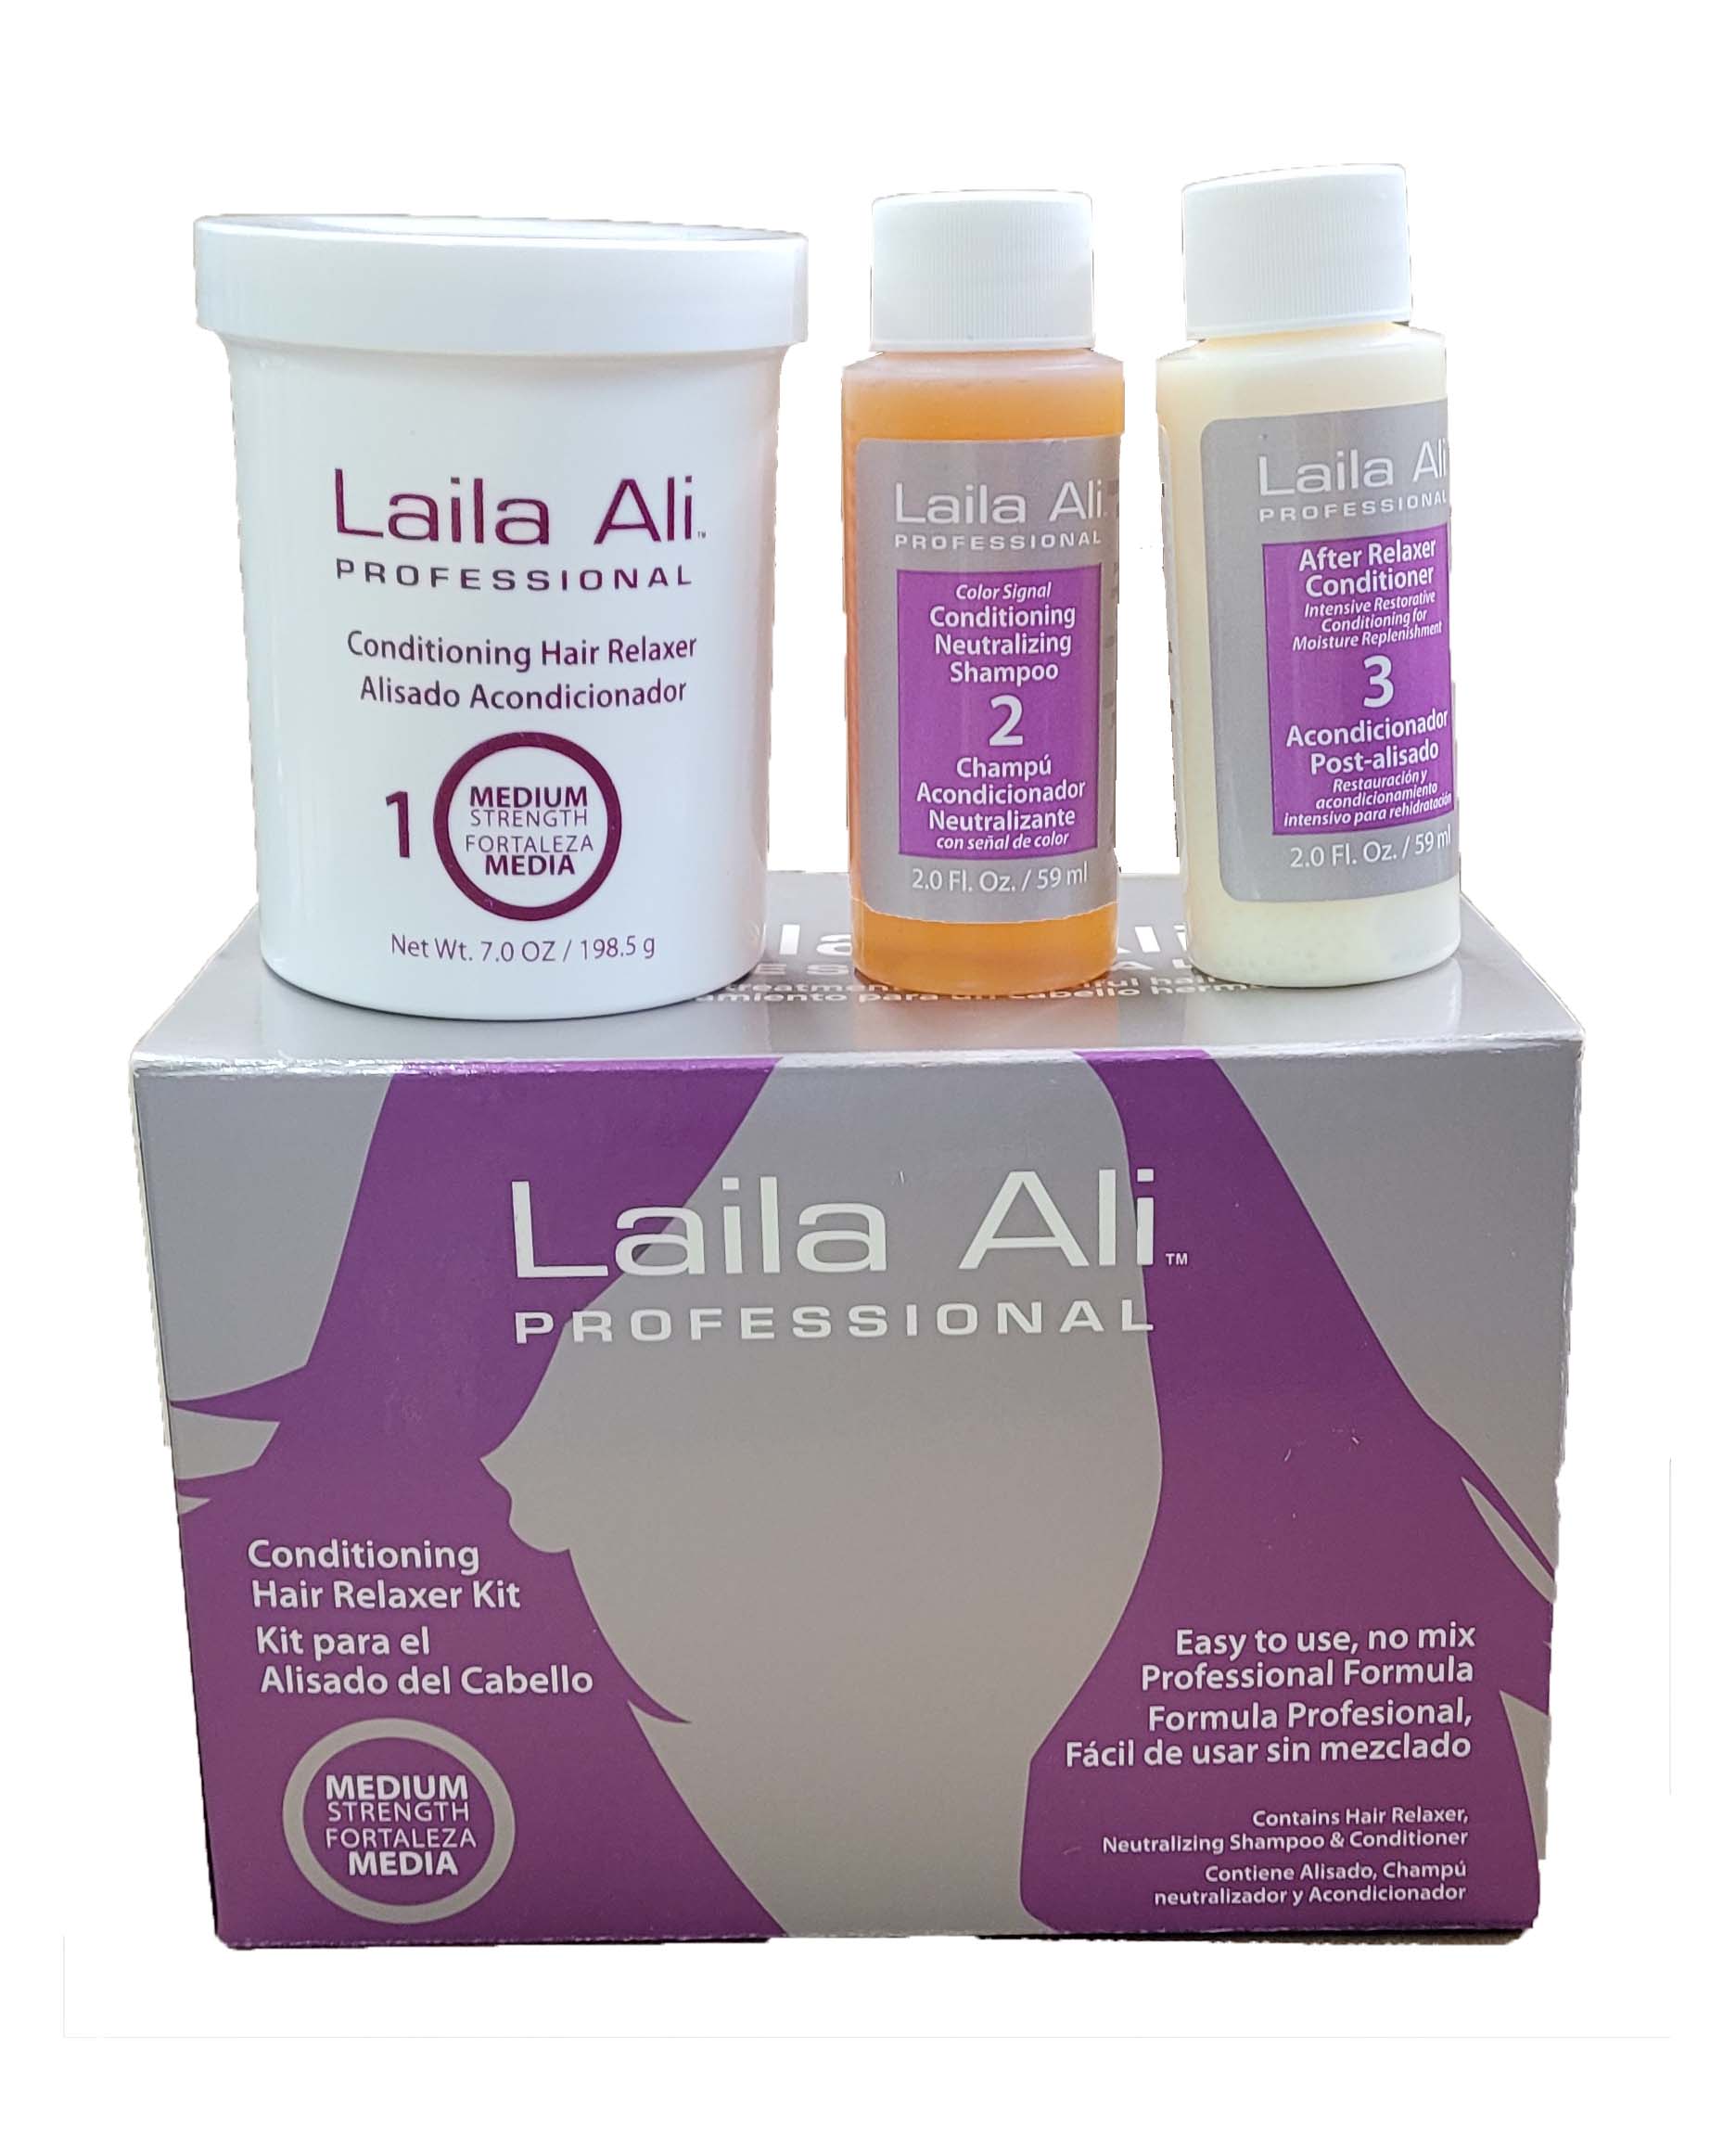 Laila Ali Professional Medium Strenght Conditioningh Hair Relaxer Kit (Pack of 2) - image 1 of 1